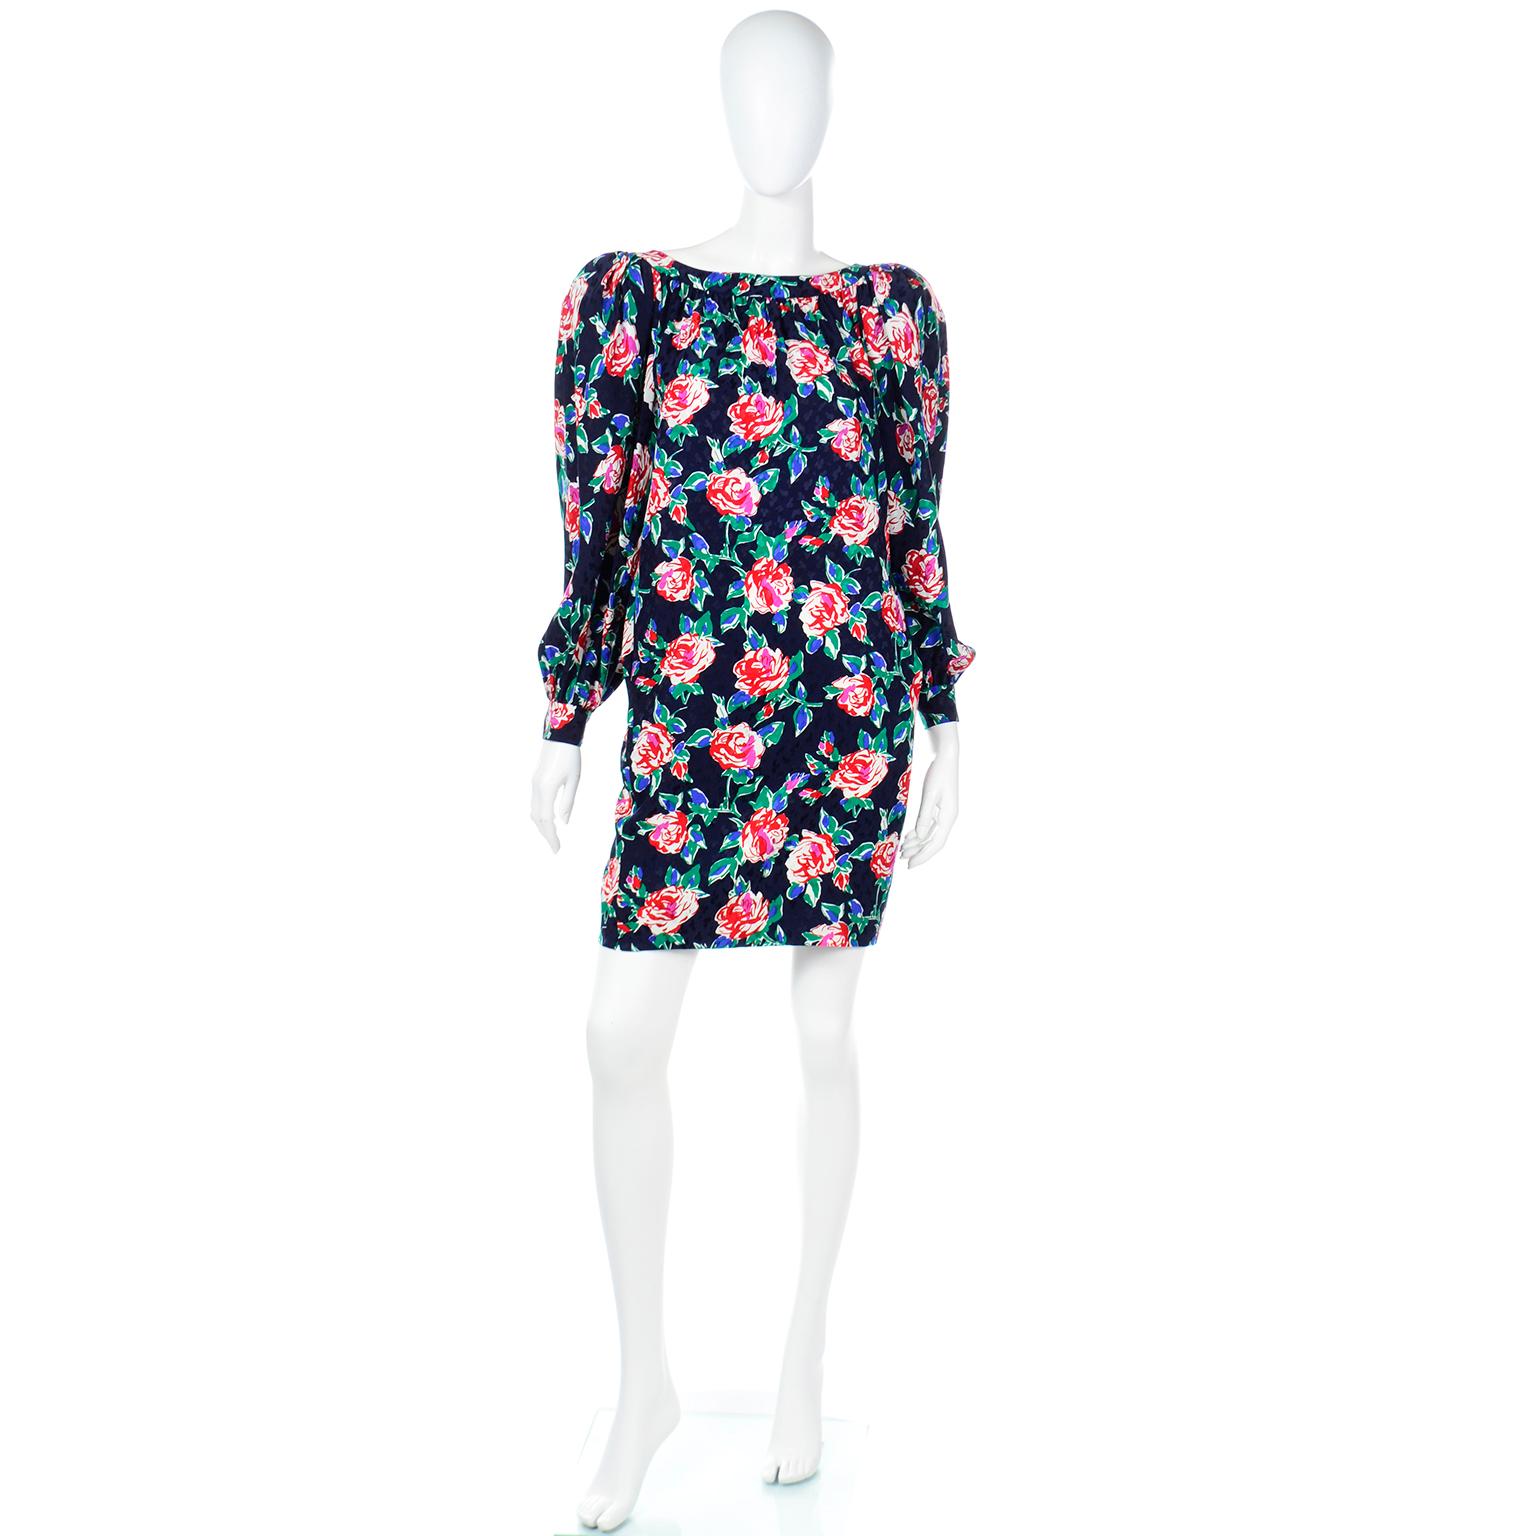 This wonderful vintage Yves Saint Laurent 1980's silk dress is in a navy blue, green, red, pink and white floral print.This dress has a slight off-the-shoulder style with a thick band around the neckline that creates a pleated and gathered effect,